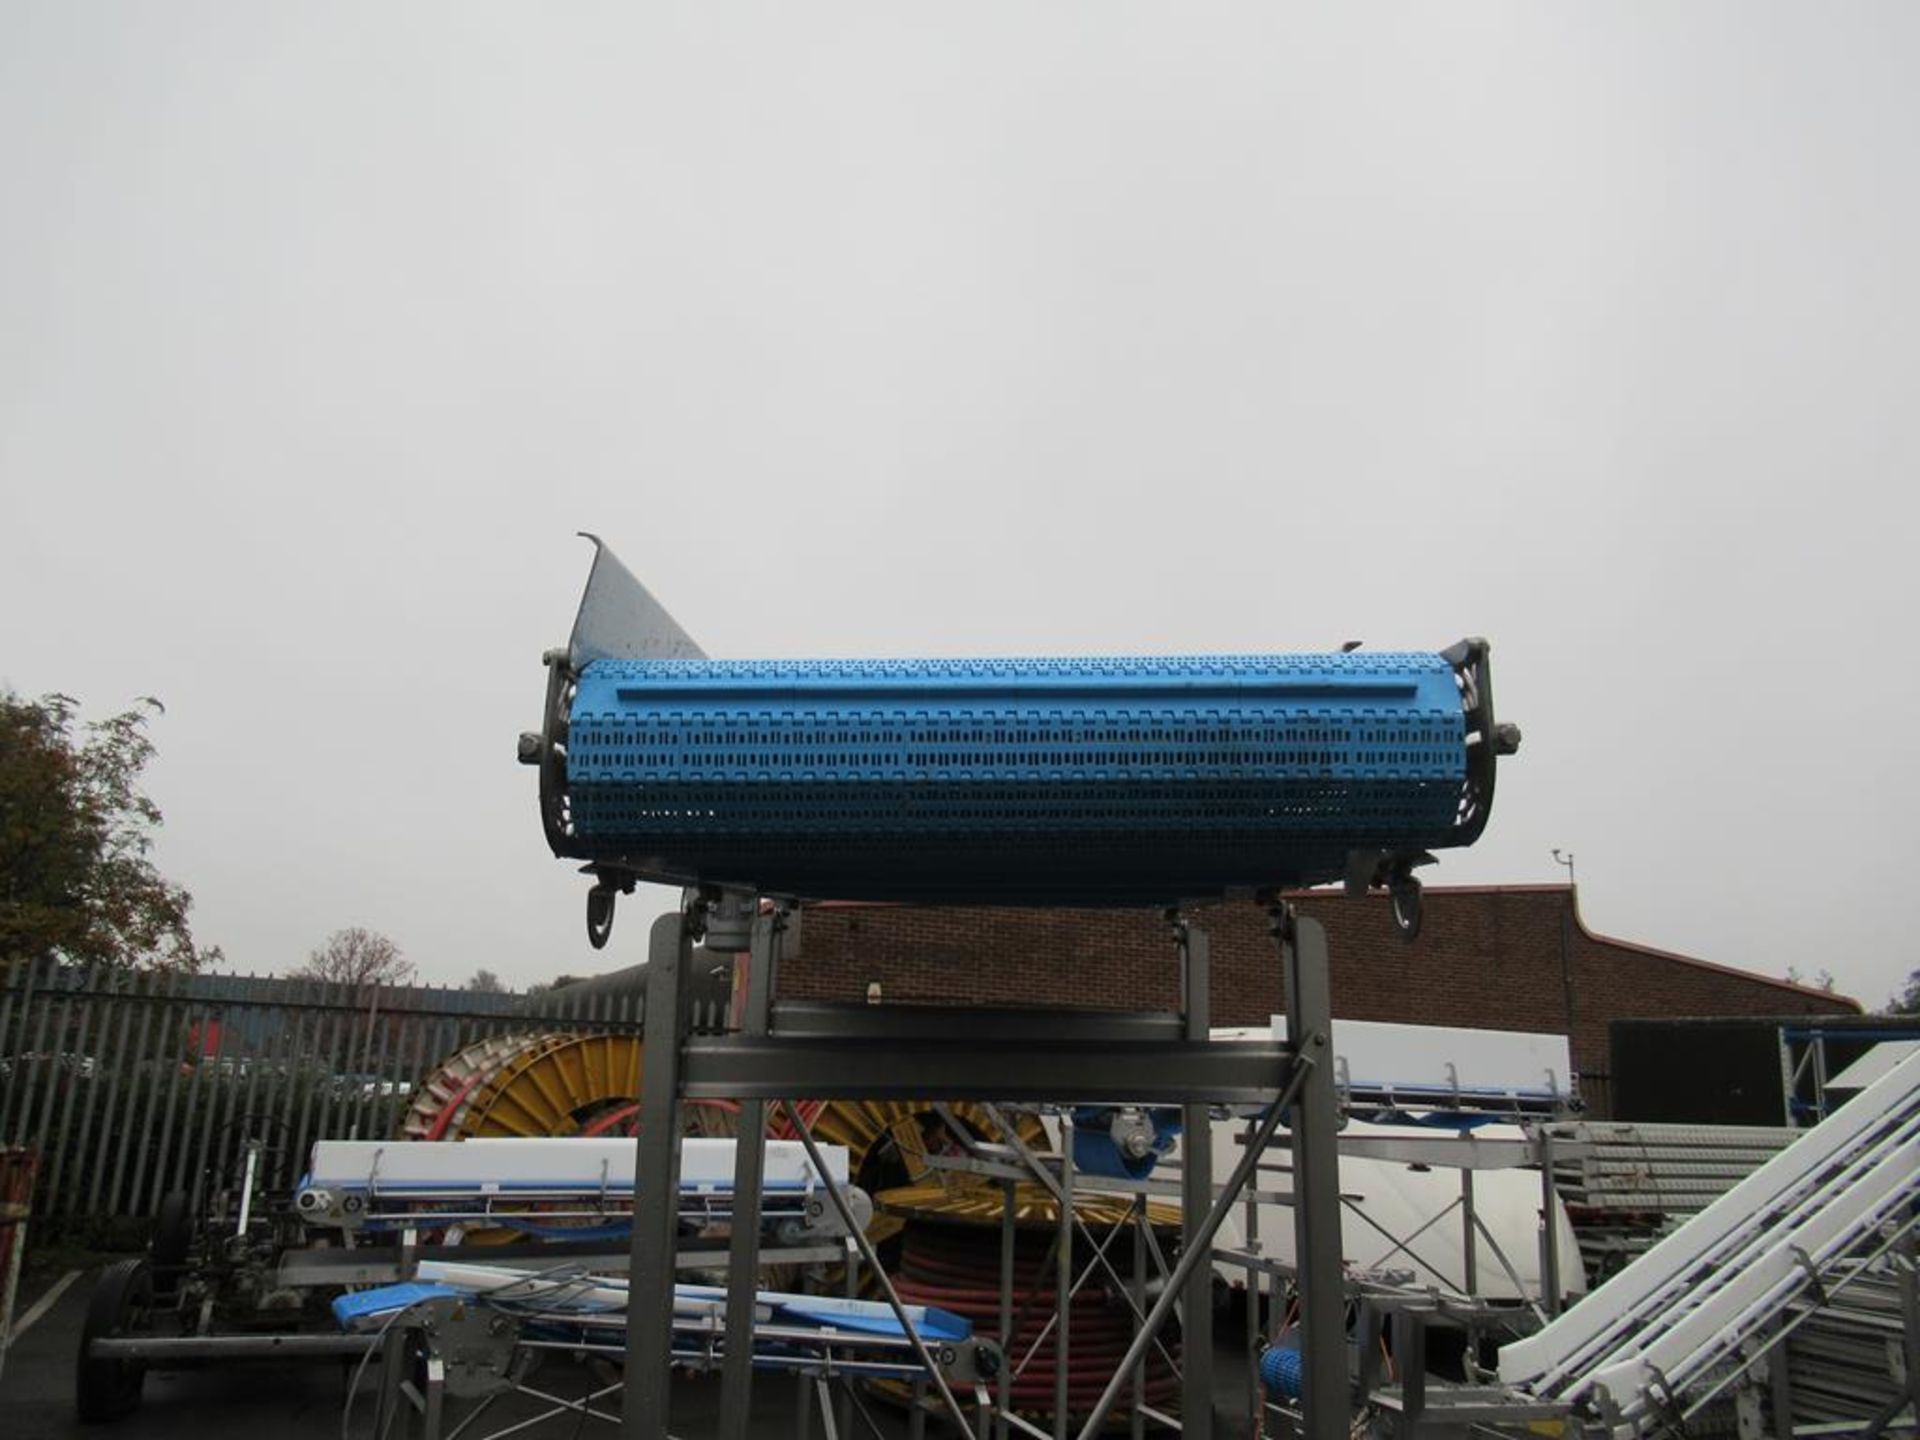 Stainless Steel Raised Conveyor System with Electric Motor Height approx 2600 x Length 2440 x 850 mm - Image 3 of 6